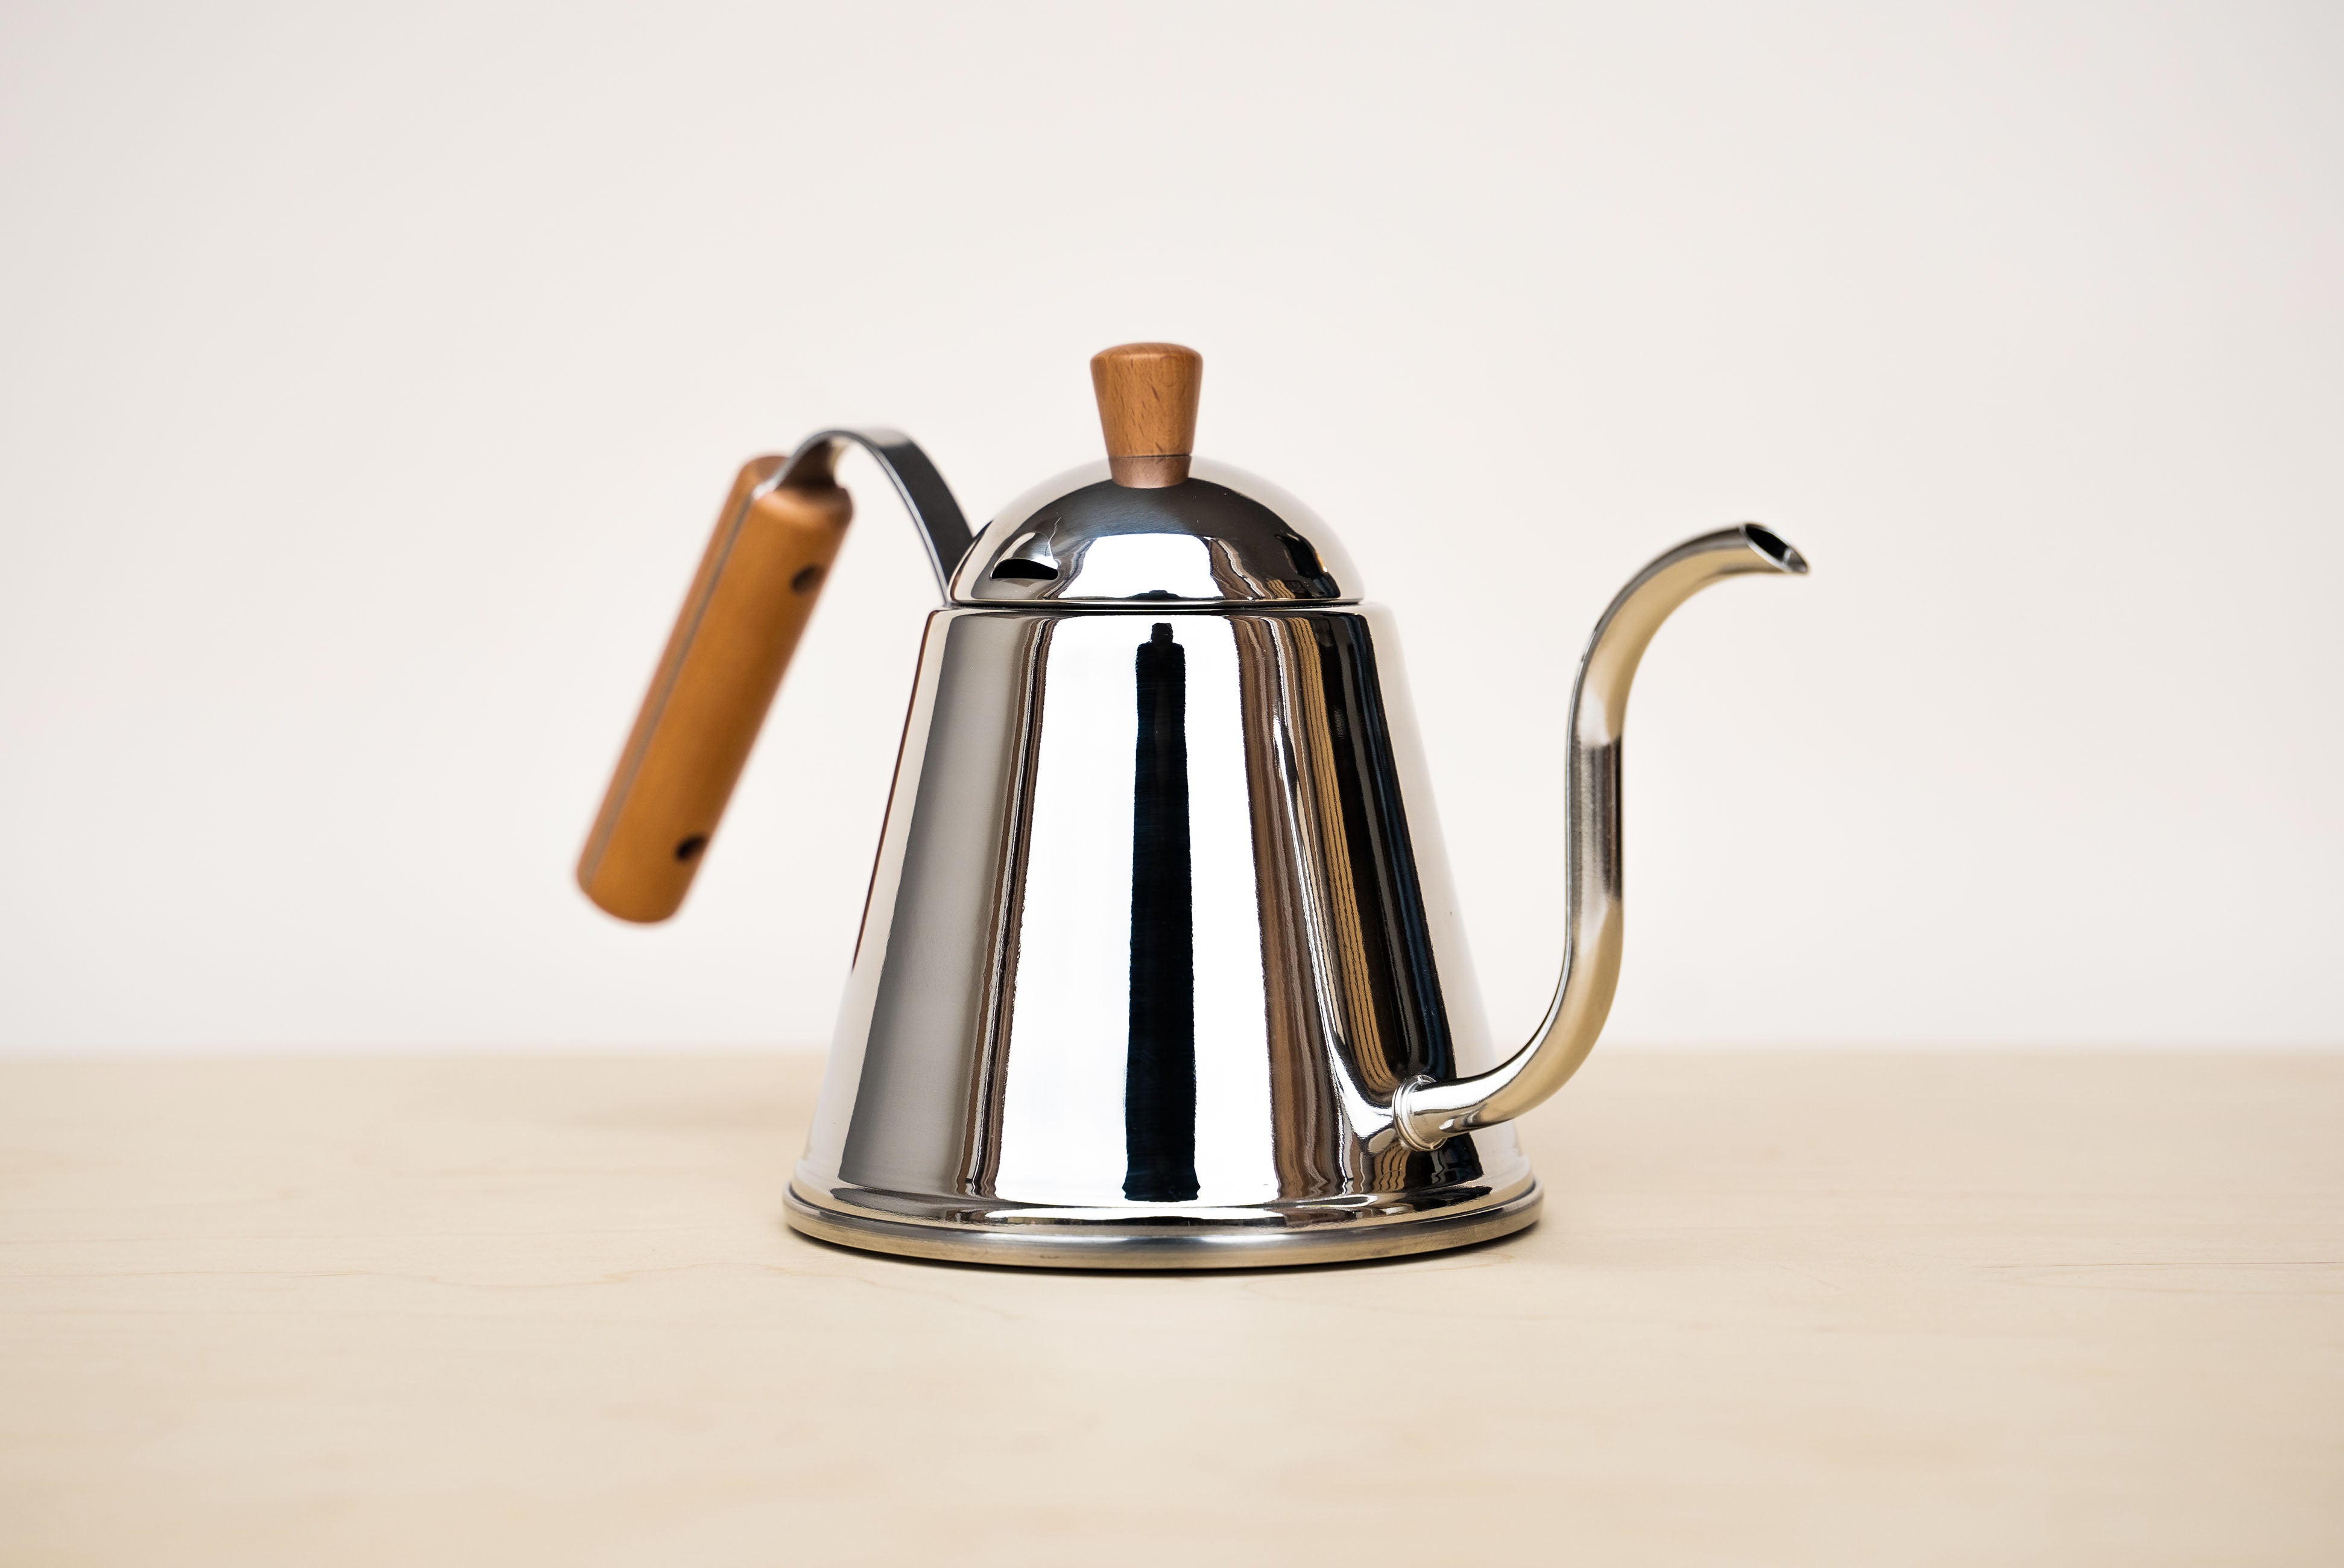 Japanese Stainless Steel Kettle | product detail